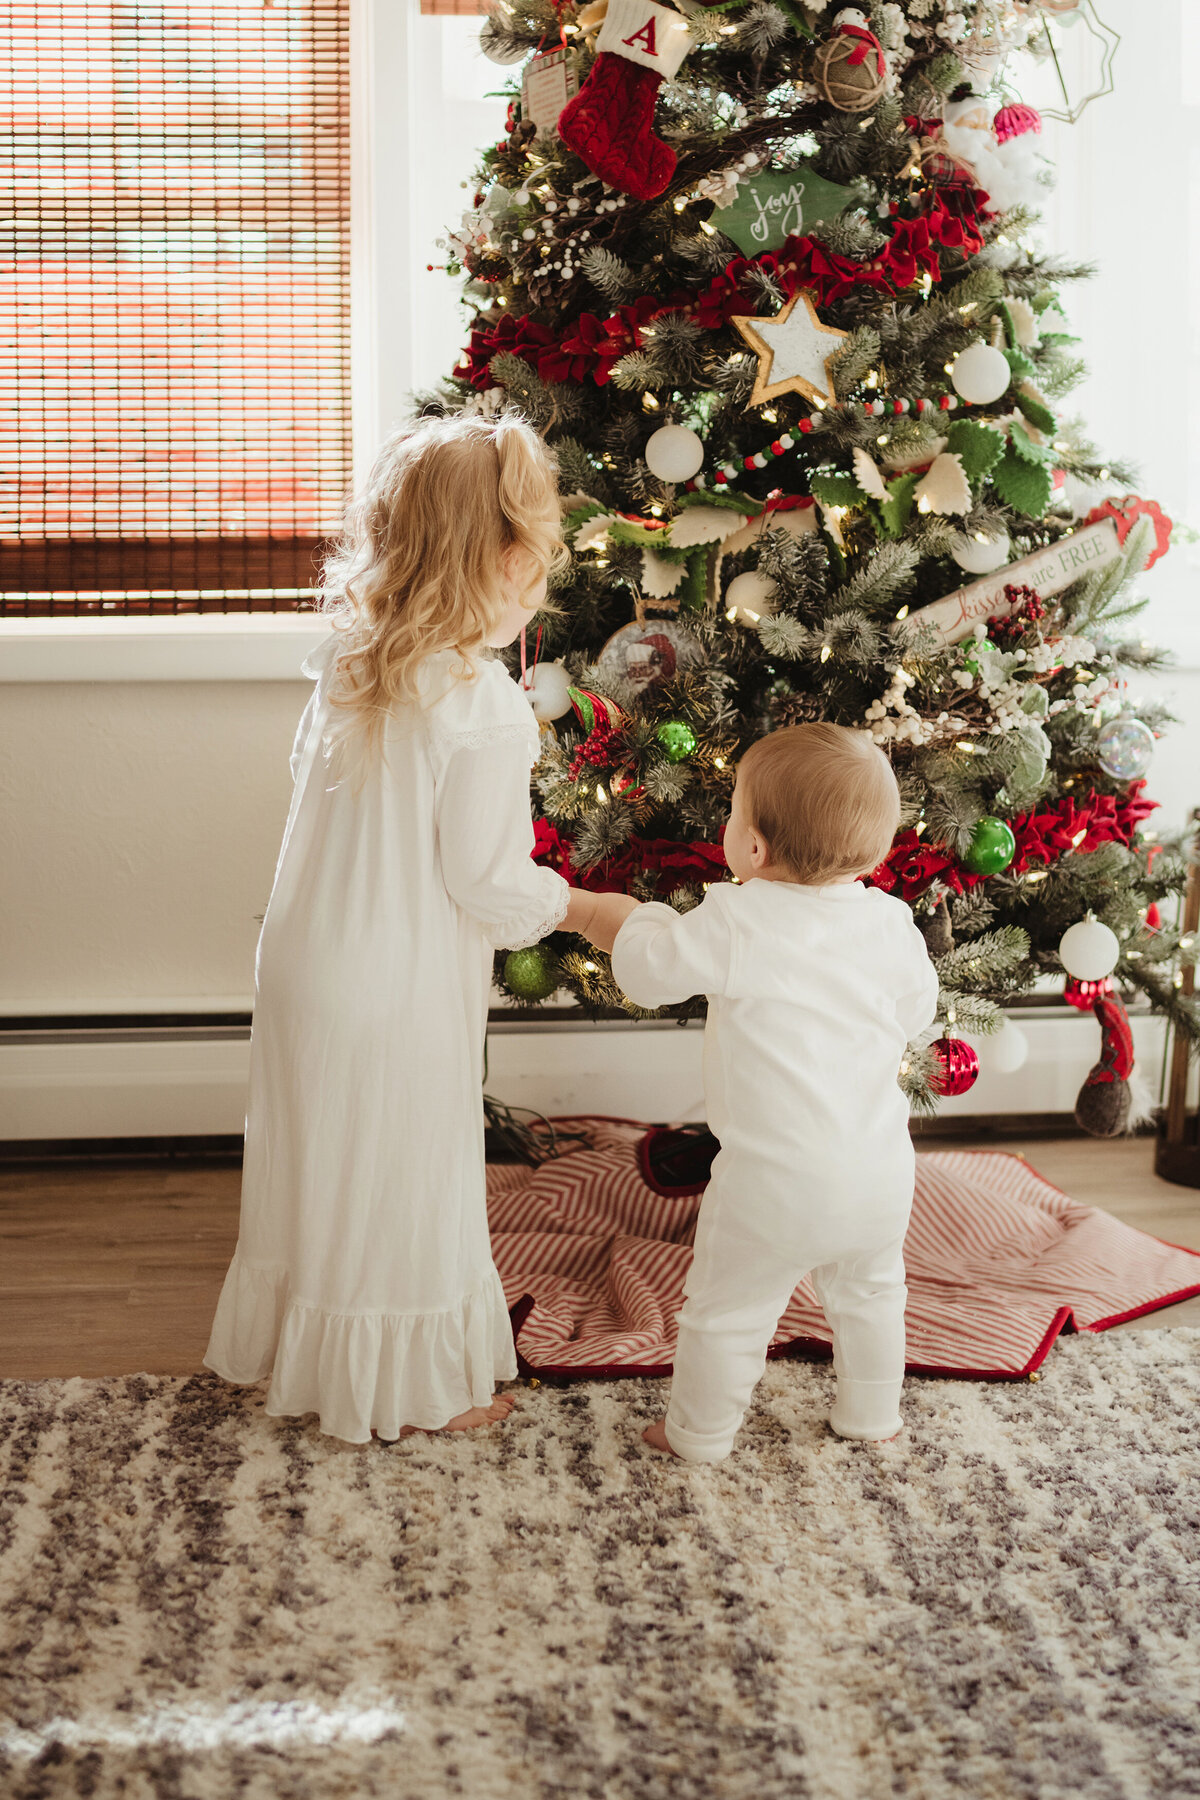 An older sister and little sister excitedly look at the Christmas tree.